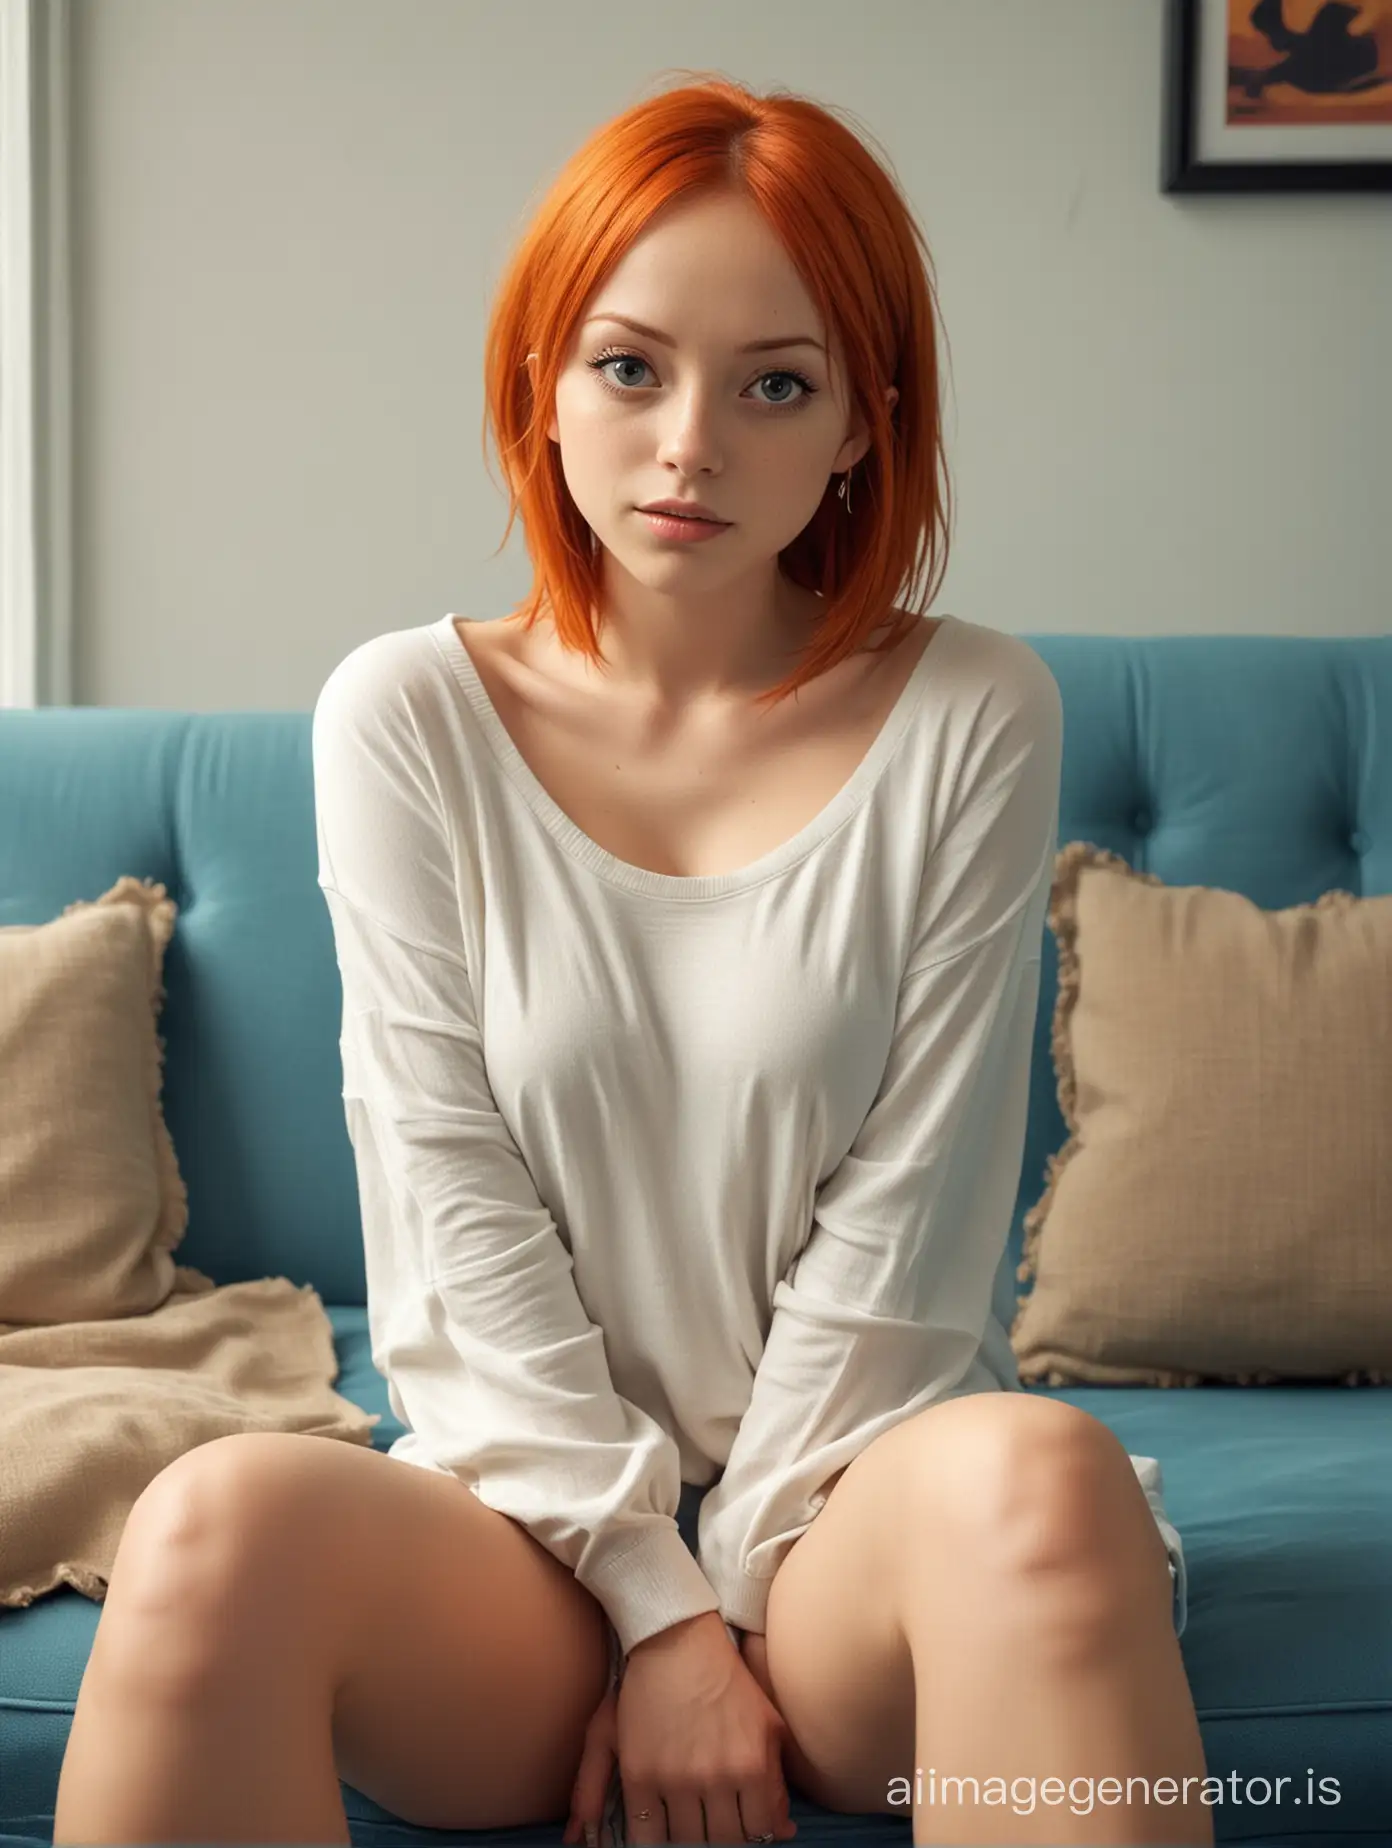 Innocent-Girl-with-Short-Red-Hair-Sitting-on-Blue-Couch-in-Spacious-Room